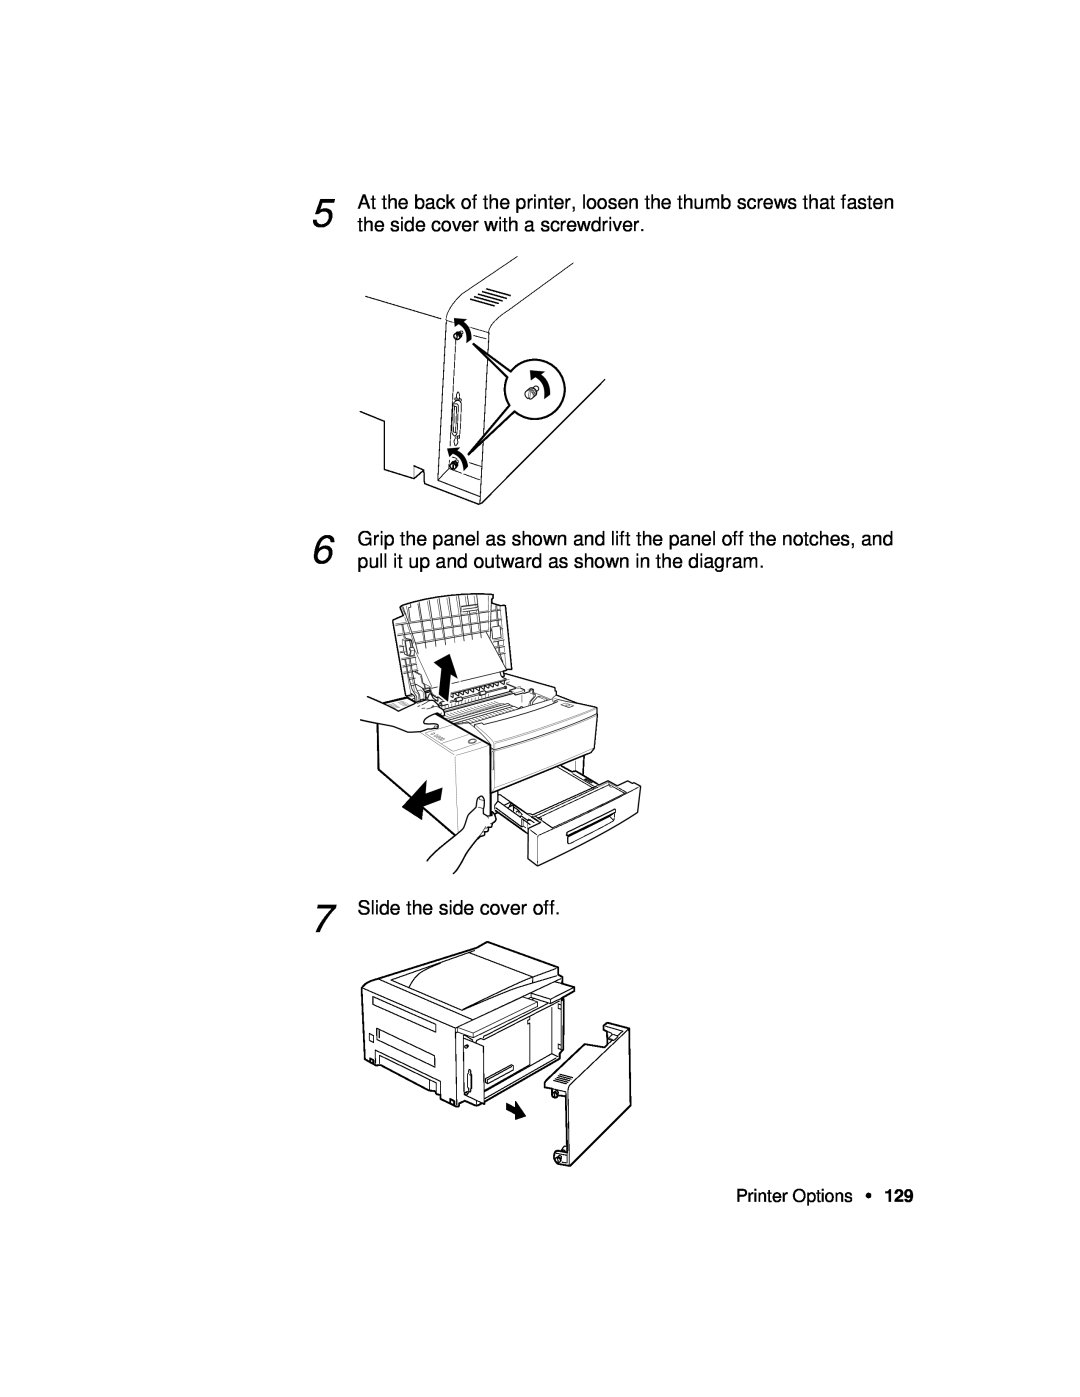 Xerox P12 manual At the back of the printer, loosen the thumb screws that fasten, the side cover with a screwdriver 